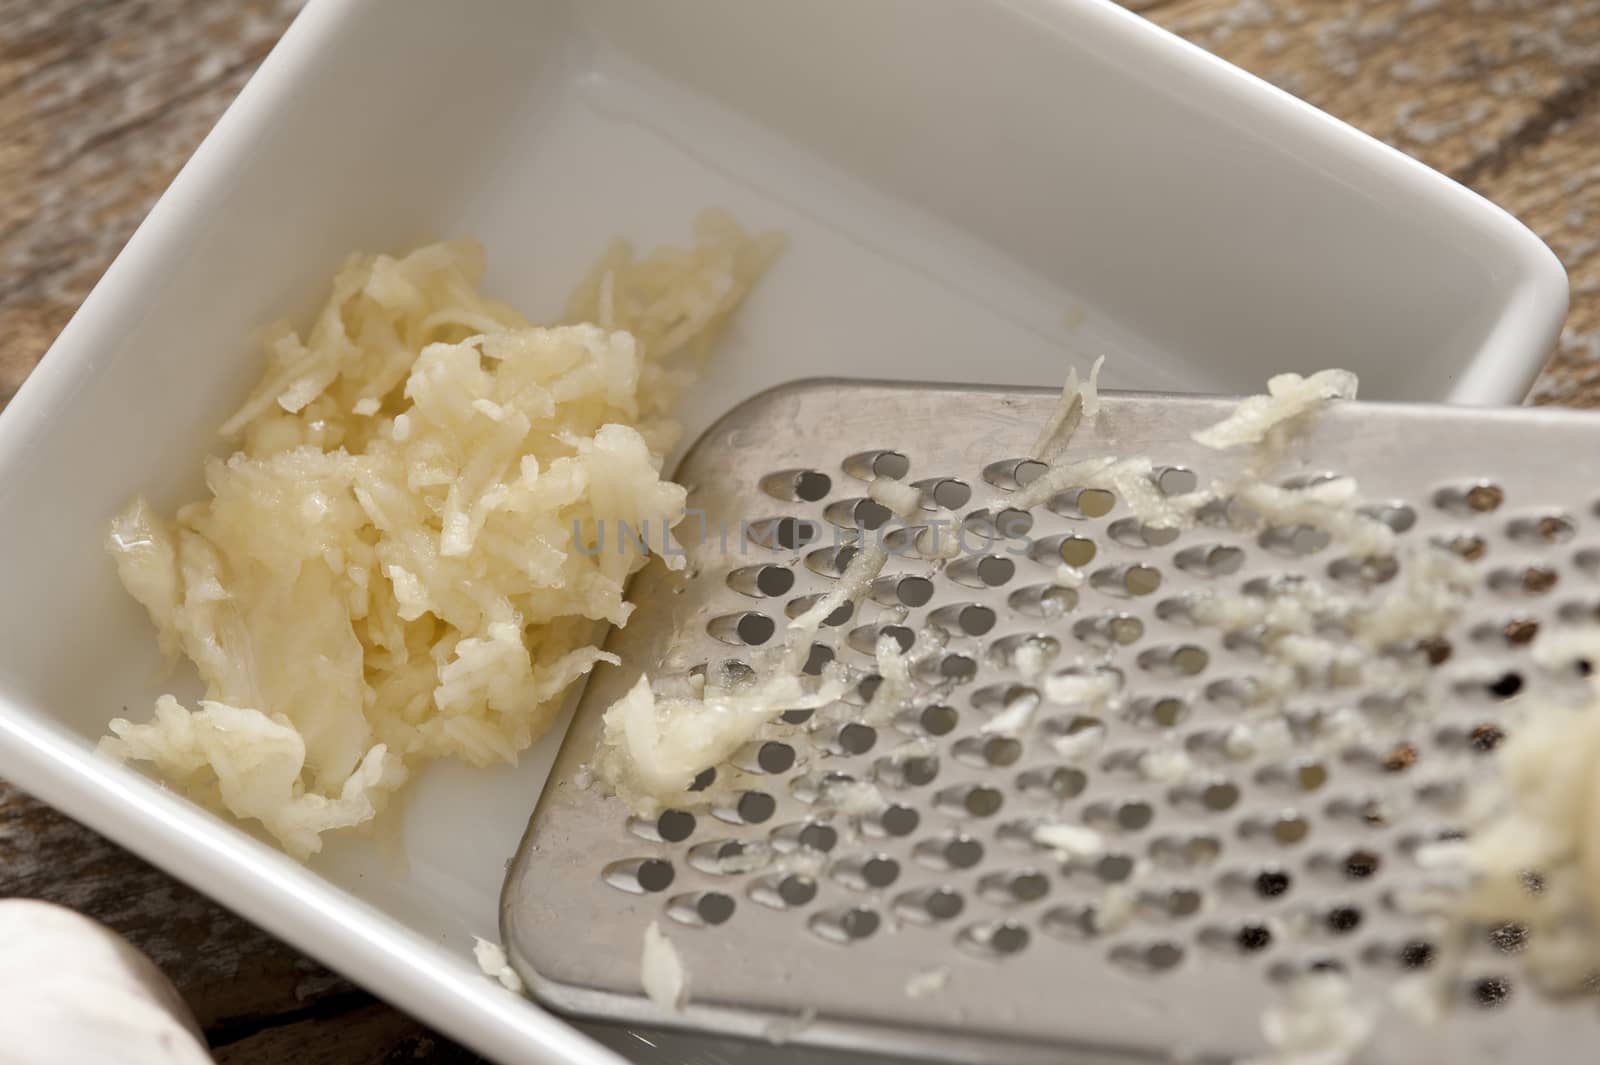 Grated fresh garlic with a grater by stockarch